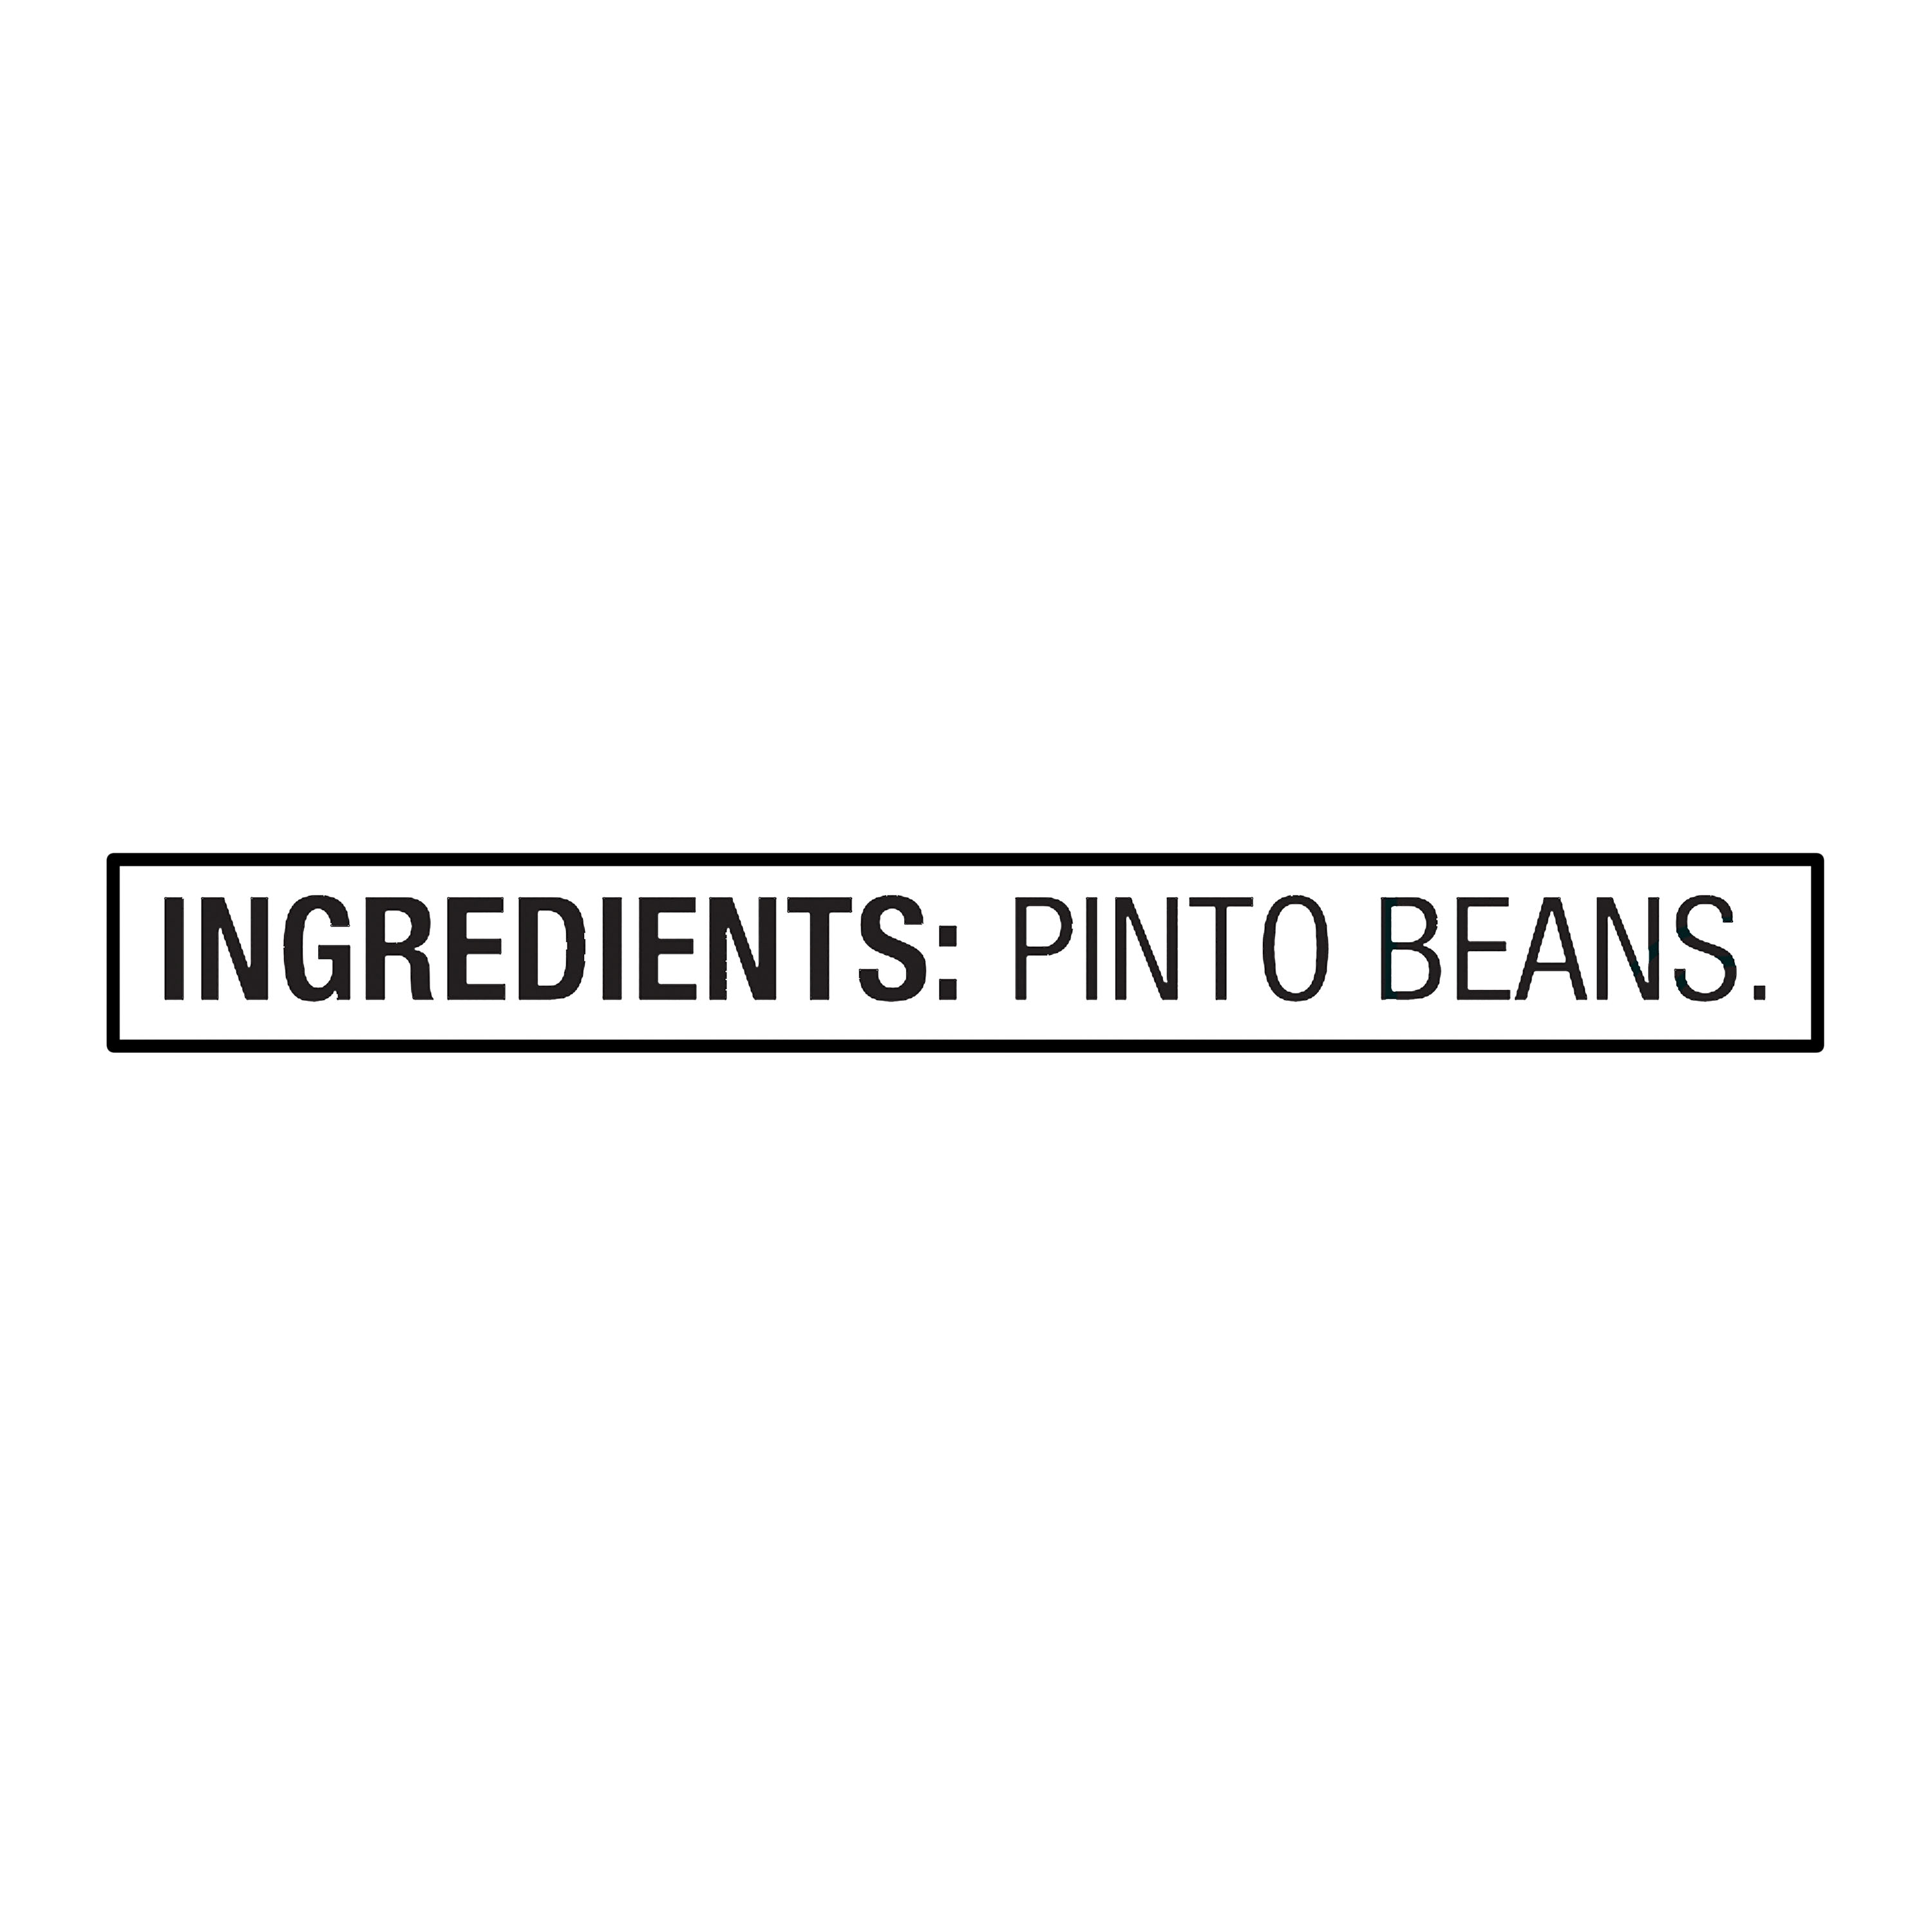 Great Value Dried Pinto Beans, 8 lb Bag - image 4 of 8